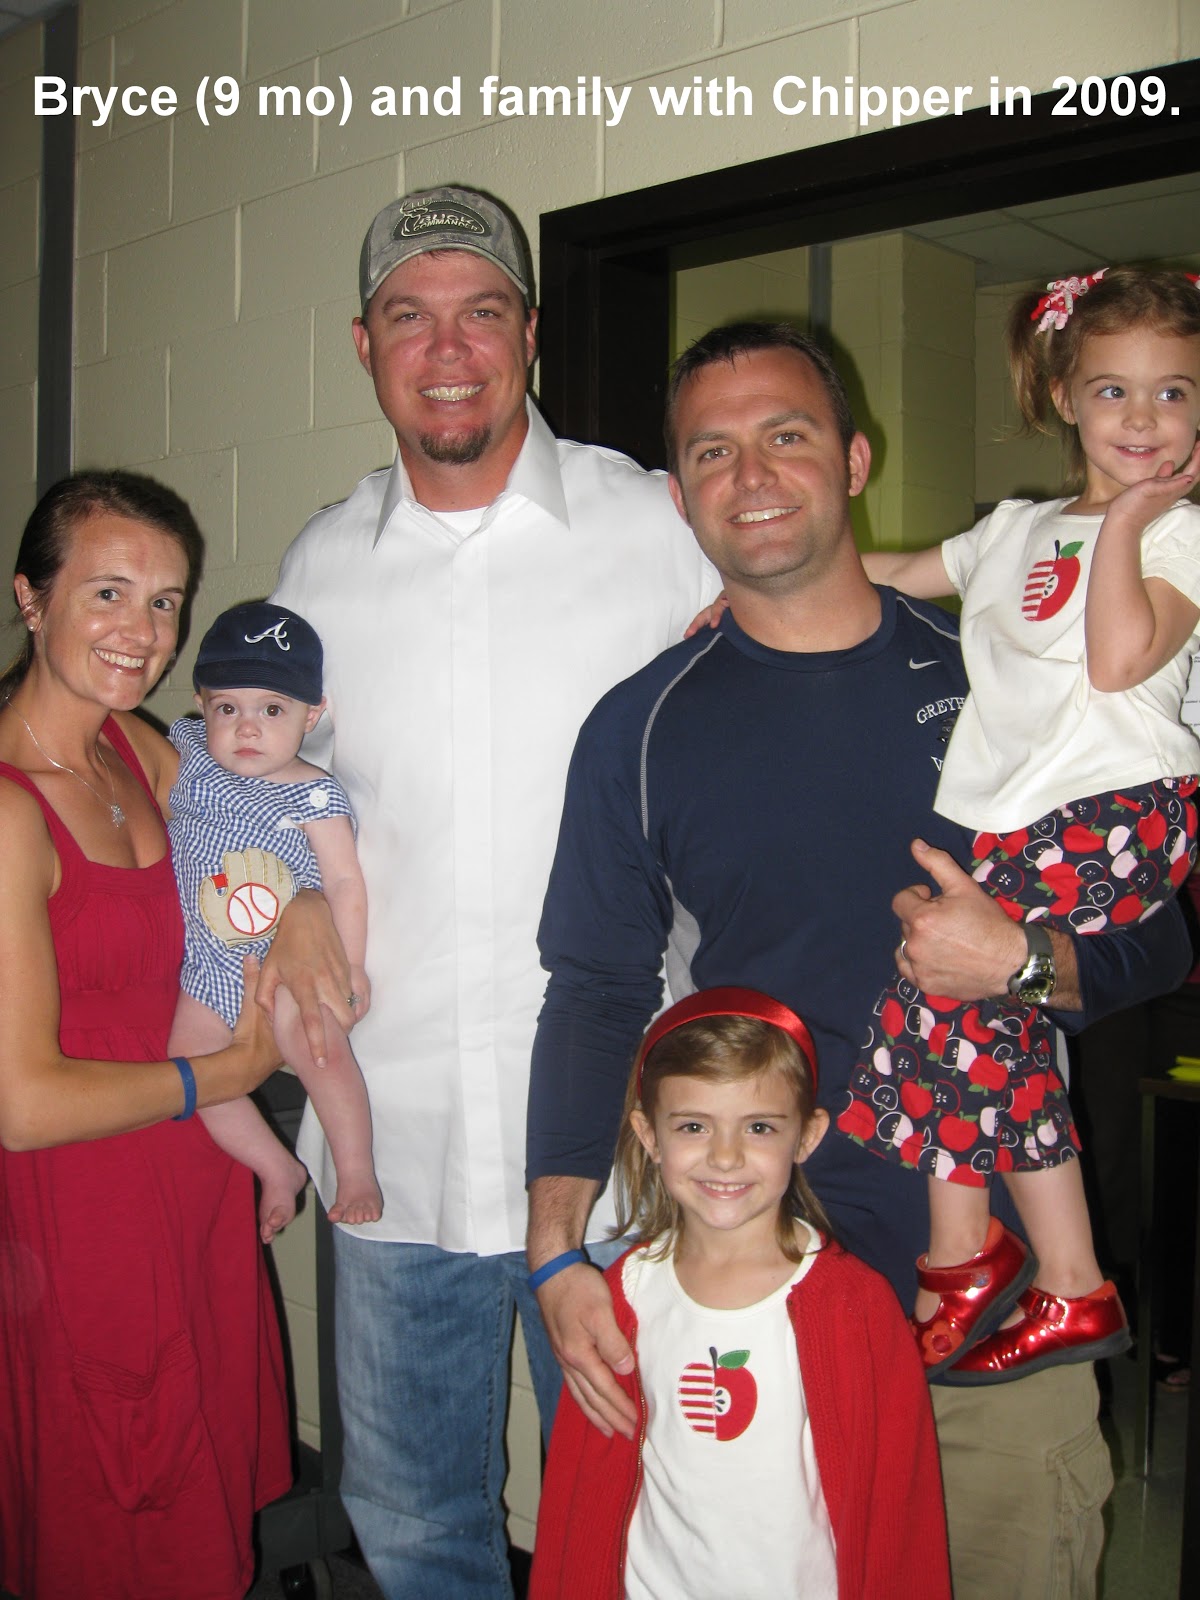 Keeping Up With The Joneses: Shout Out to Chipper Jones